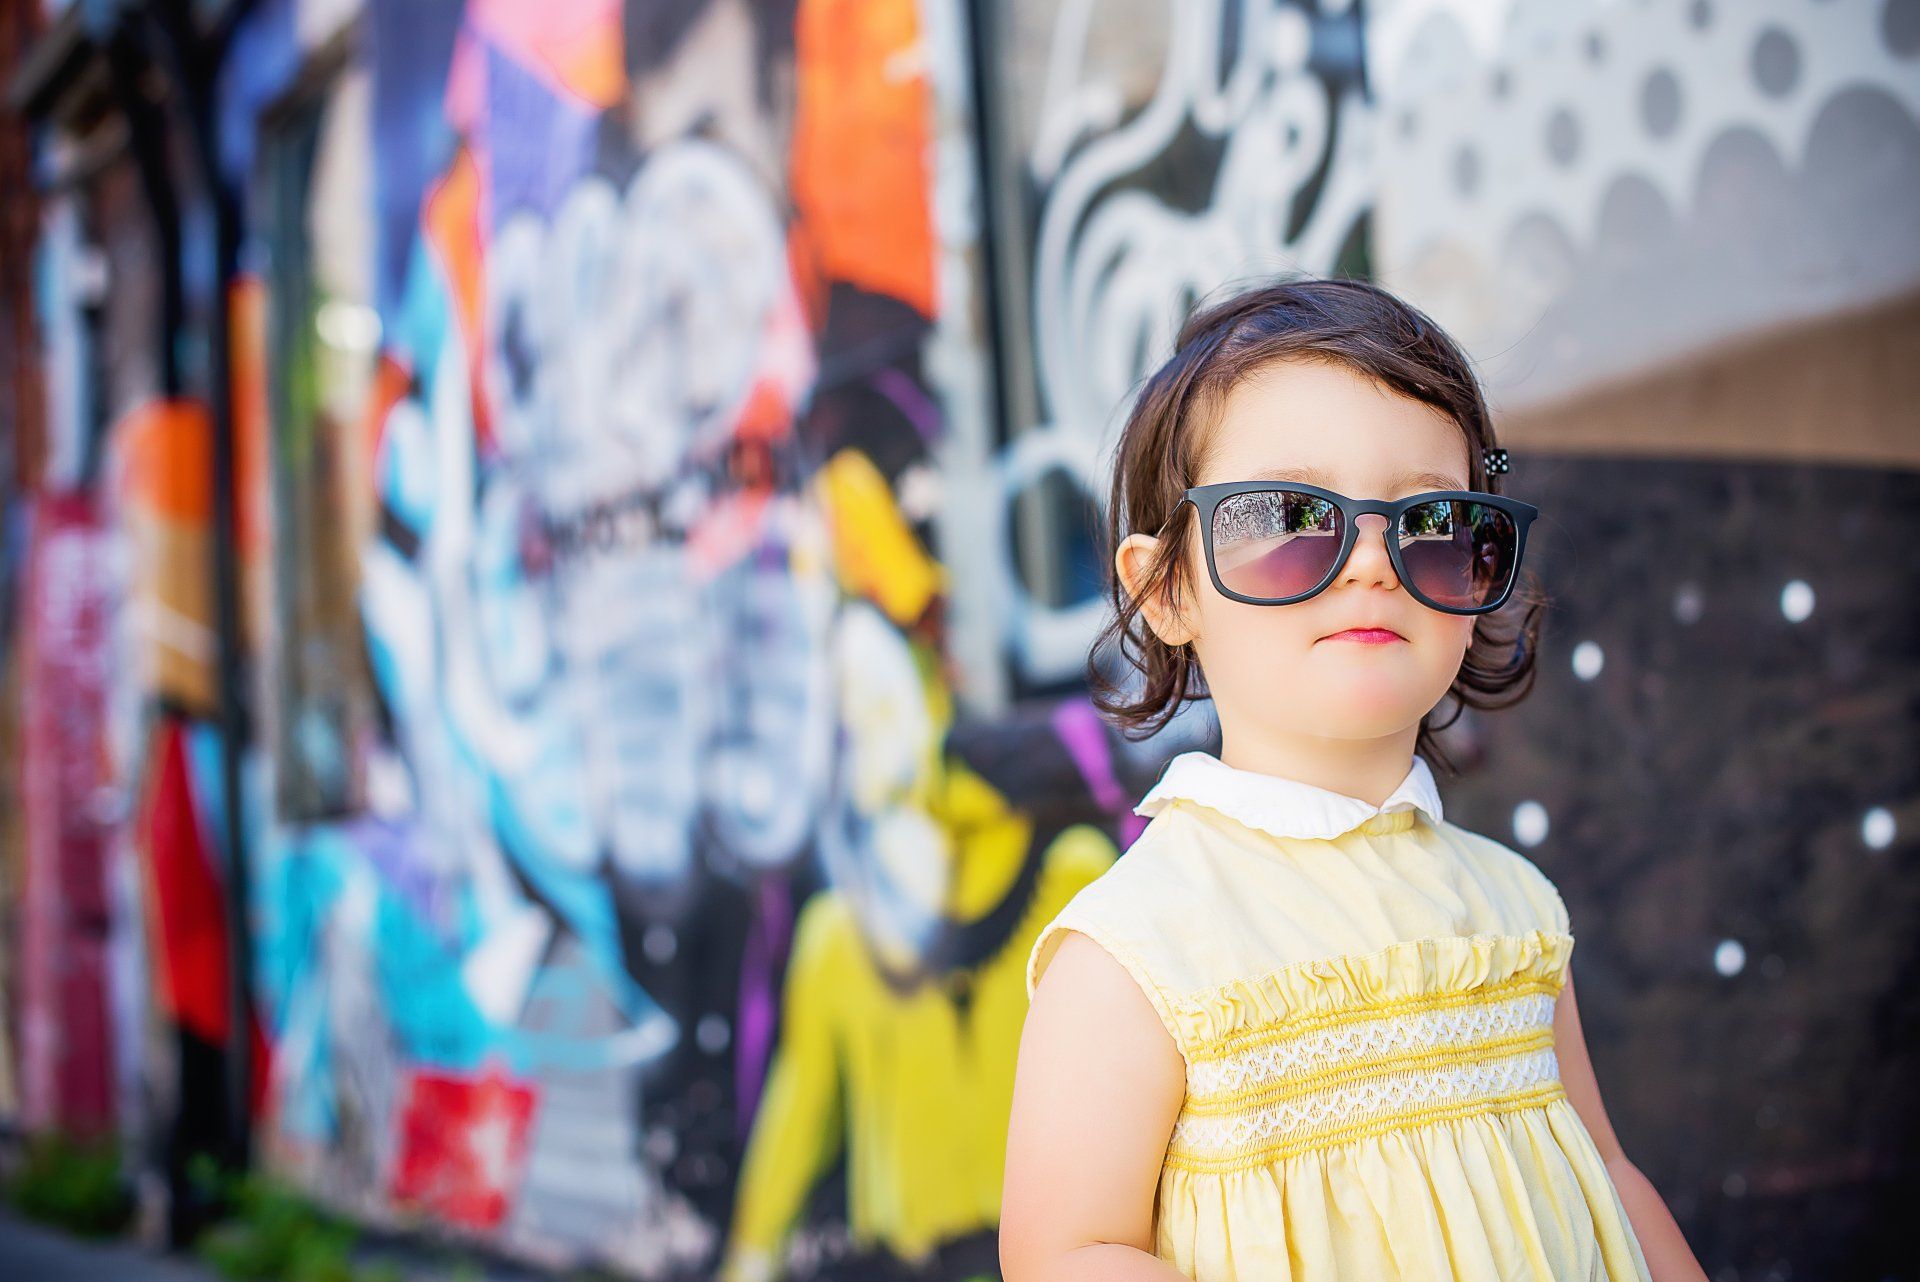 Young girl with glasses in front of graffiti-covered wall | Child photography | Stacey Naglie Toronto